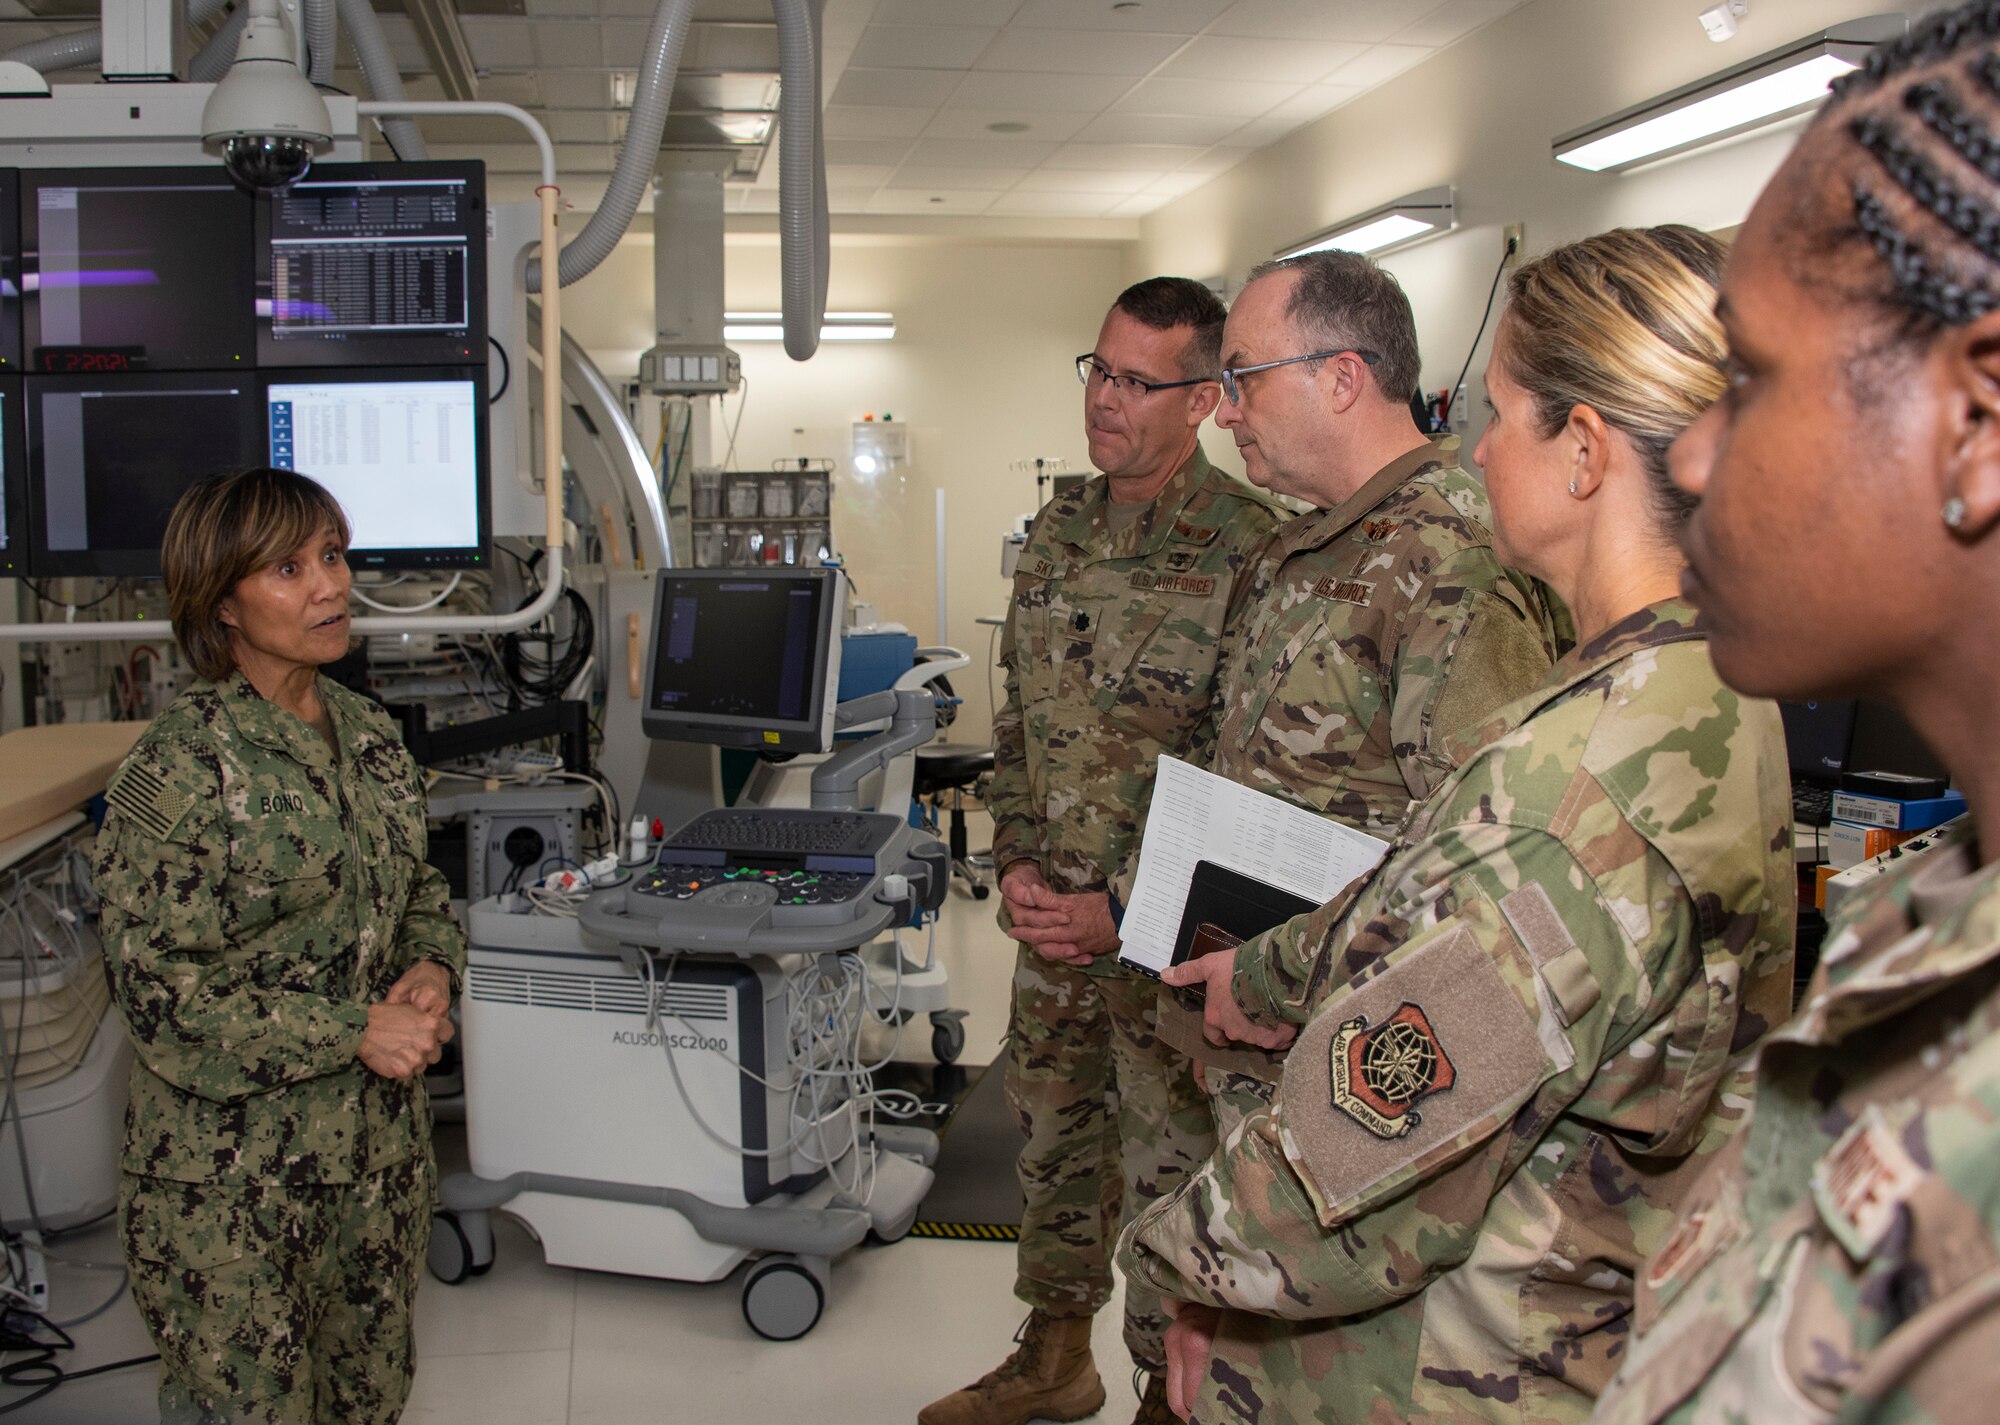 U.S. Navy Vice Adm. Raquel C. Bono, left, Defense Health Agency, Defense Health Headquarters director, tours the heart, lung vascular center at David Grant USAF Medical Center, April 23, 2019, at Travis Air Force Base, California. Bono’s visit focused on the rollout of the Military Health System Genesis, the Department of Defense’s new electronic health record which the 60th Medical Group will use exclusively beginning in September 2019.  (U.S. Air Force photo by Heide Couch)